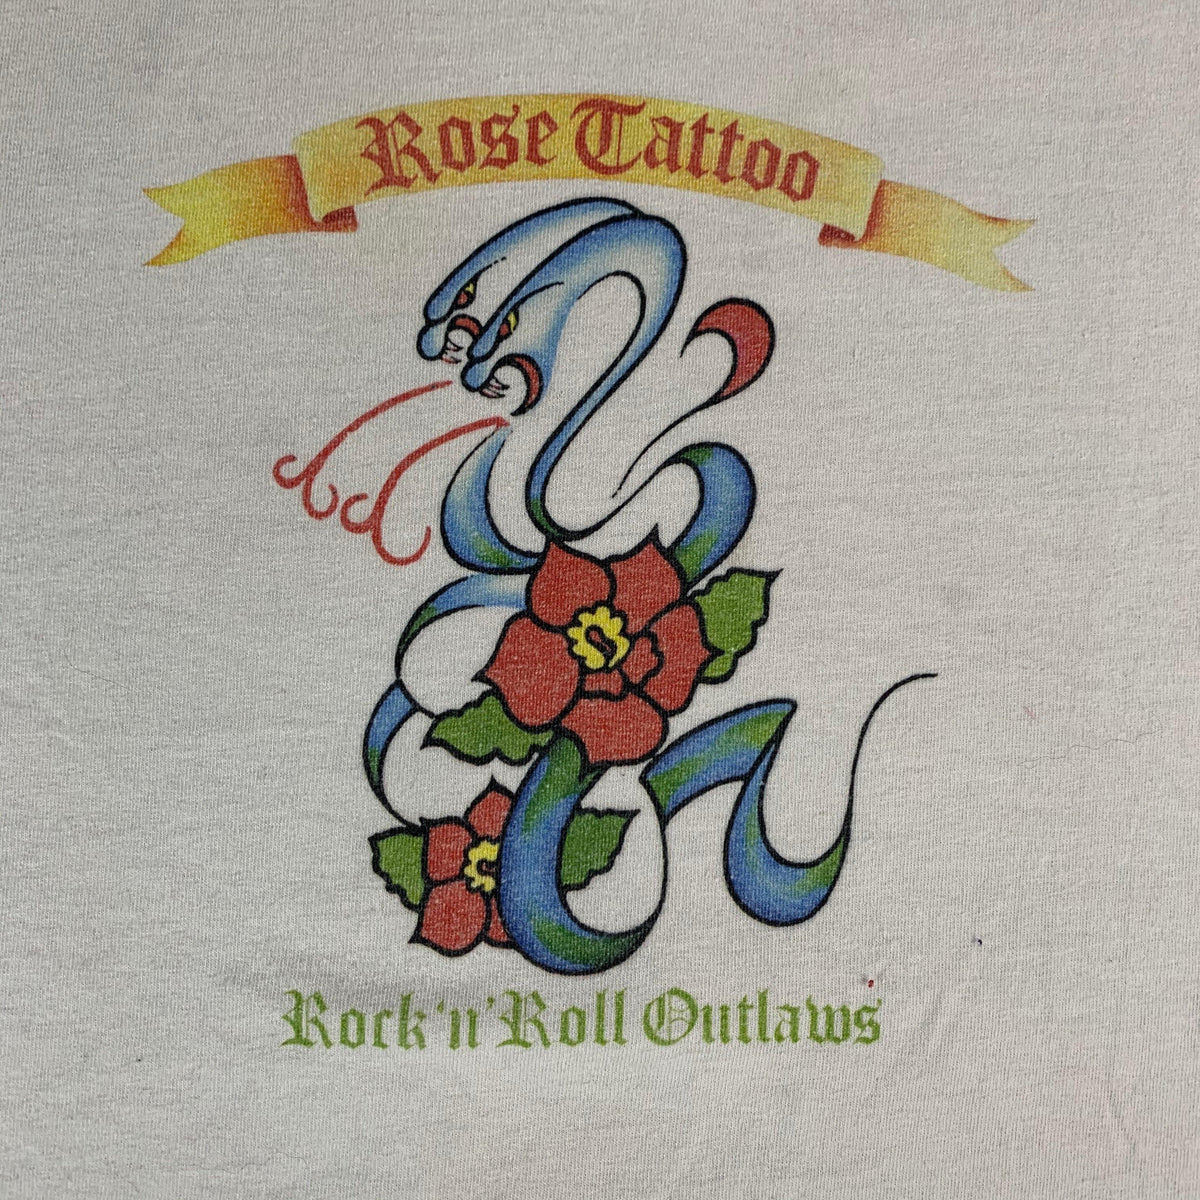 Vintage Rose Tattoo &quot;Rock &#39;N&#39; Roll Outlaws&quot; T-Shirt - jointcustodydc